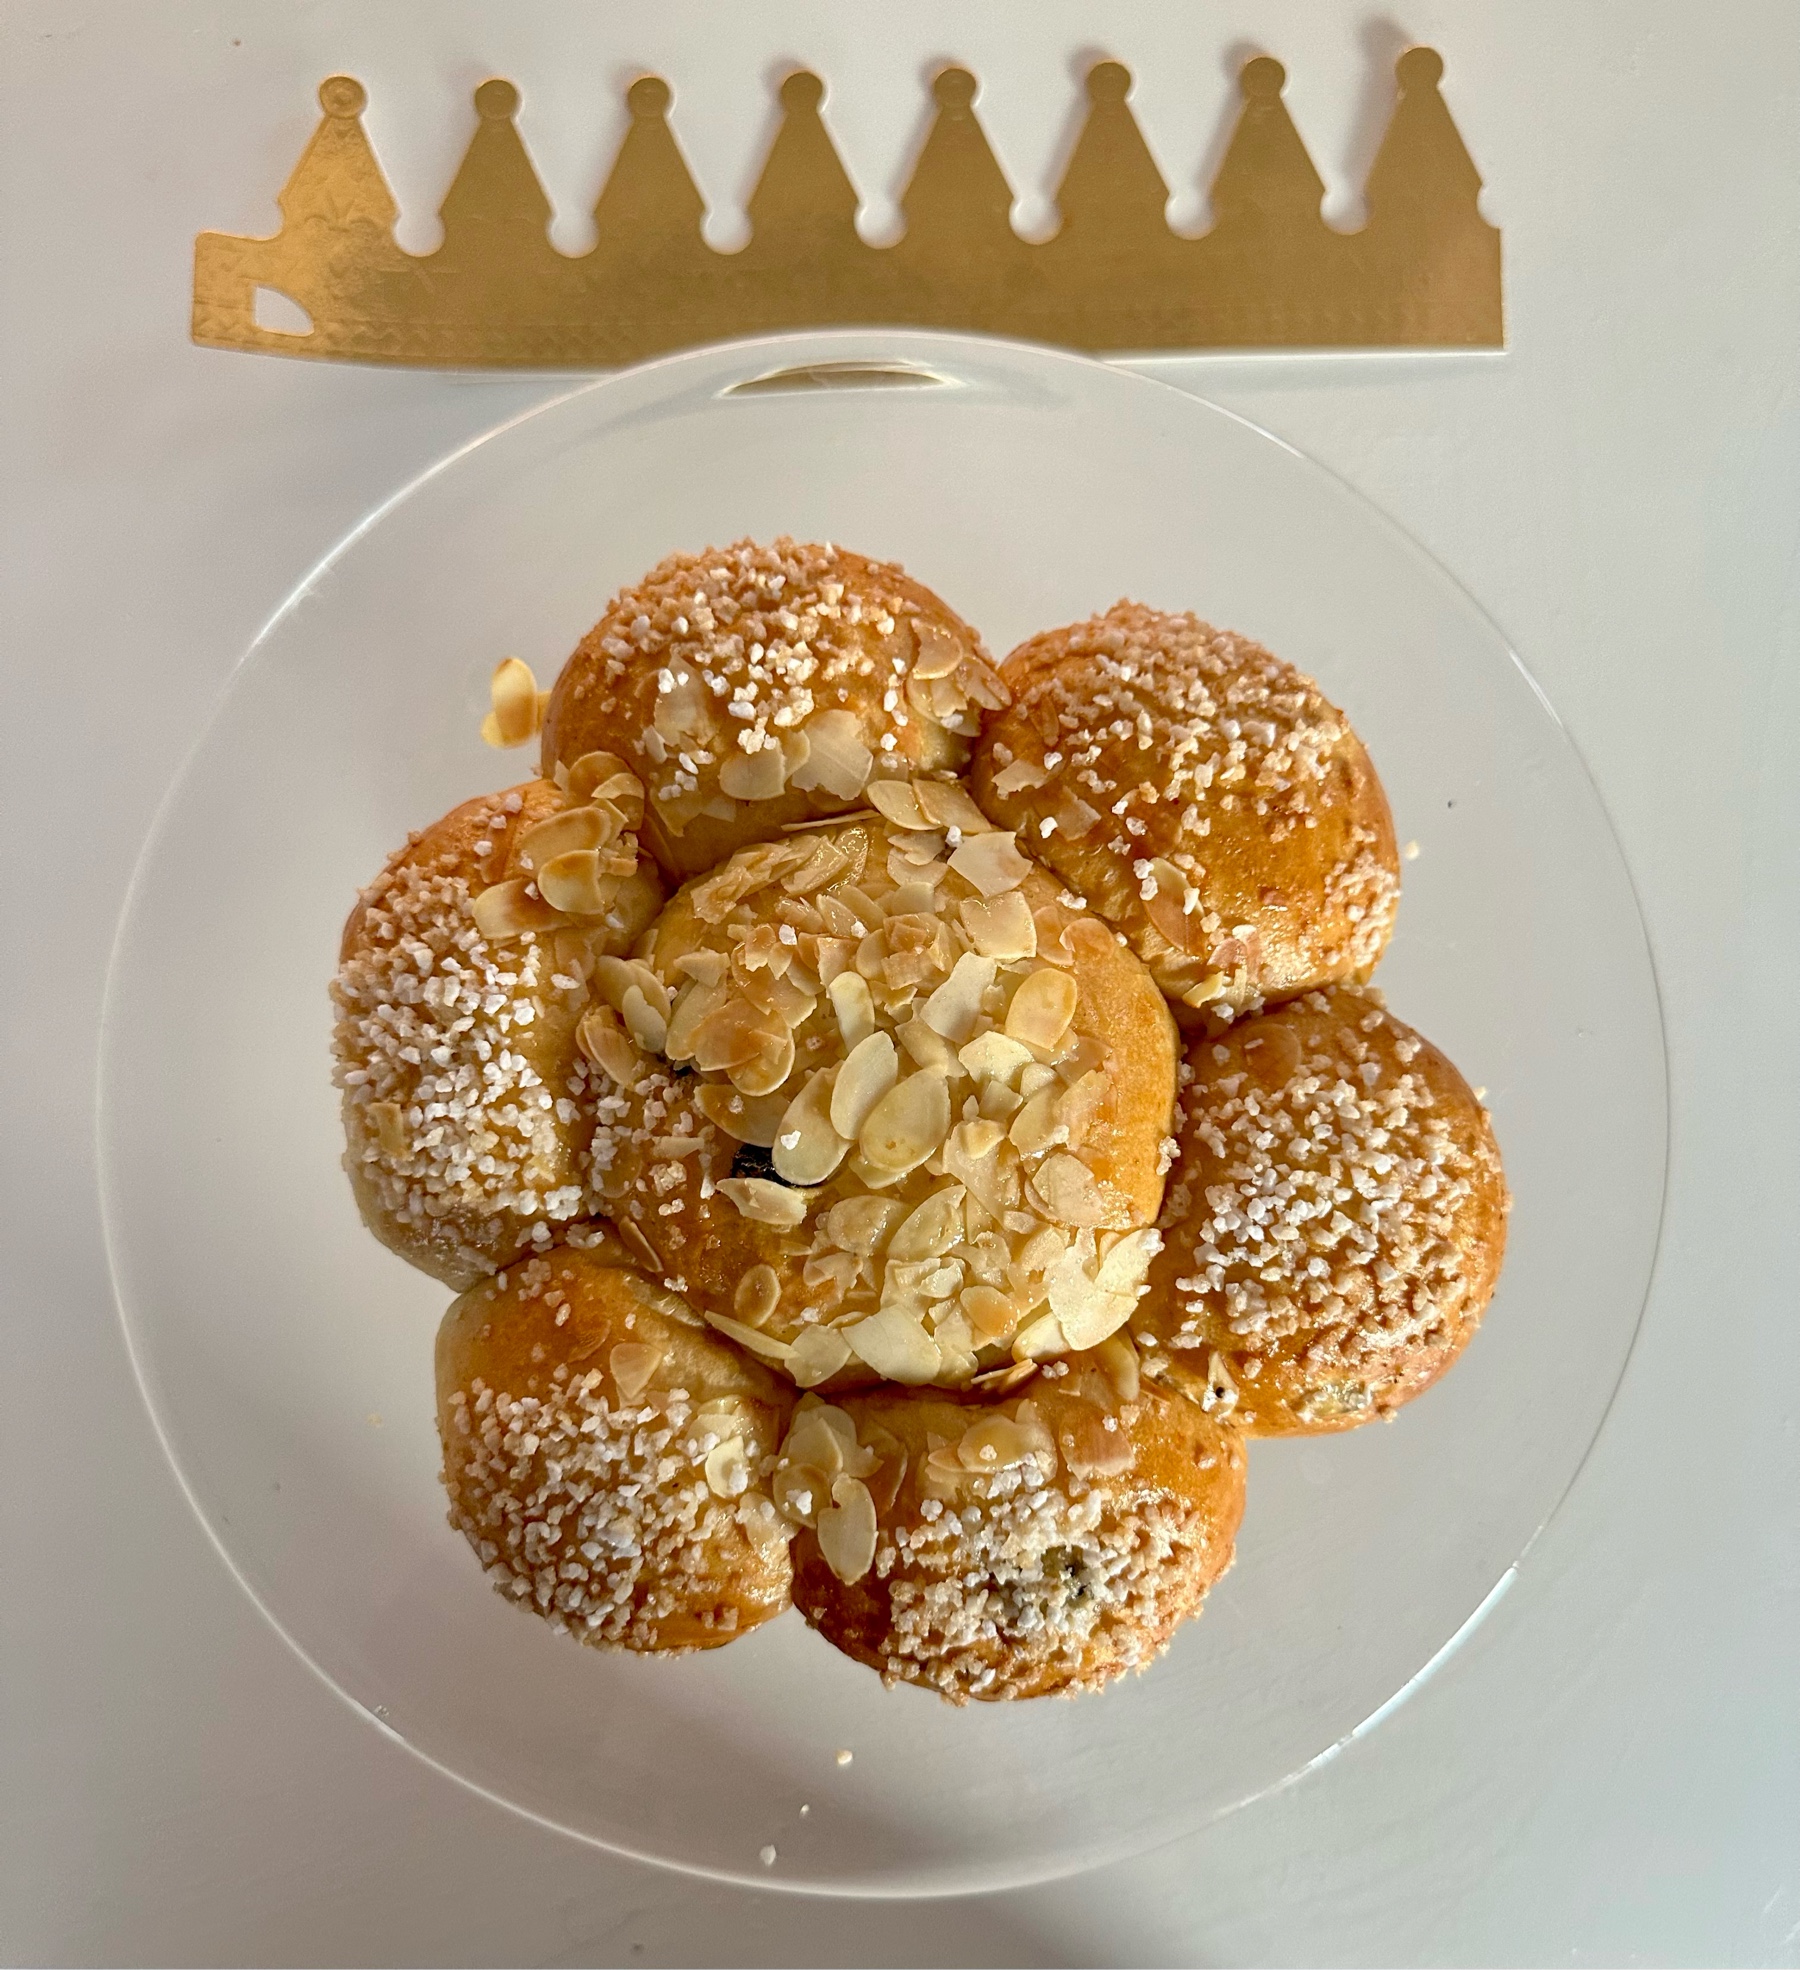 Sweet roll covered in almond slivers and coarse sugar with 6 rolls around a larger center. A gold paper crown is at the top.